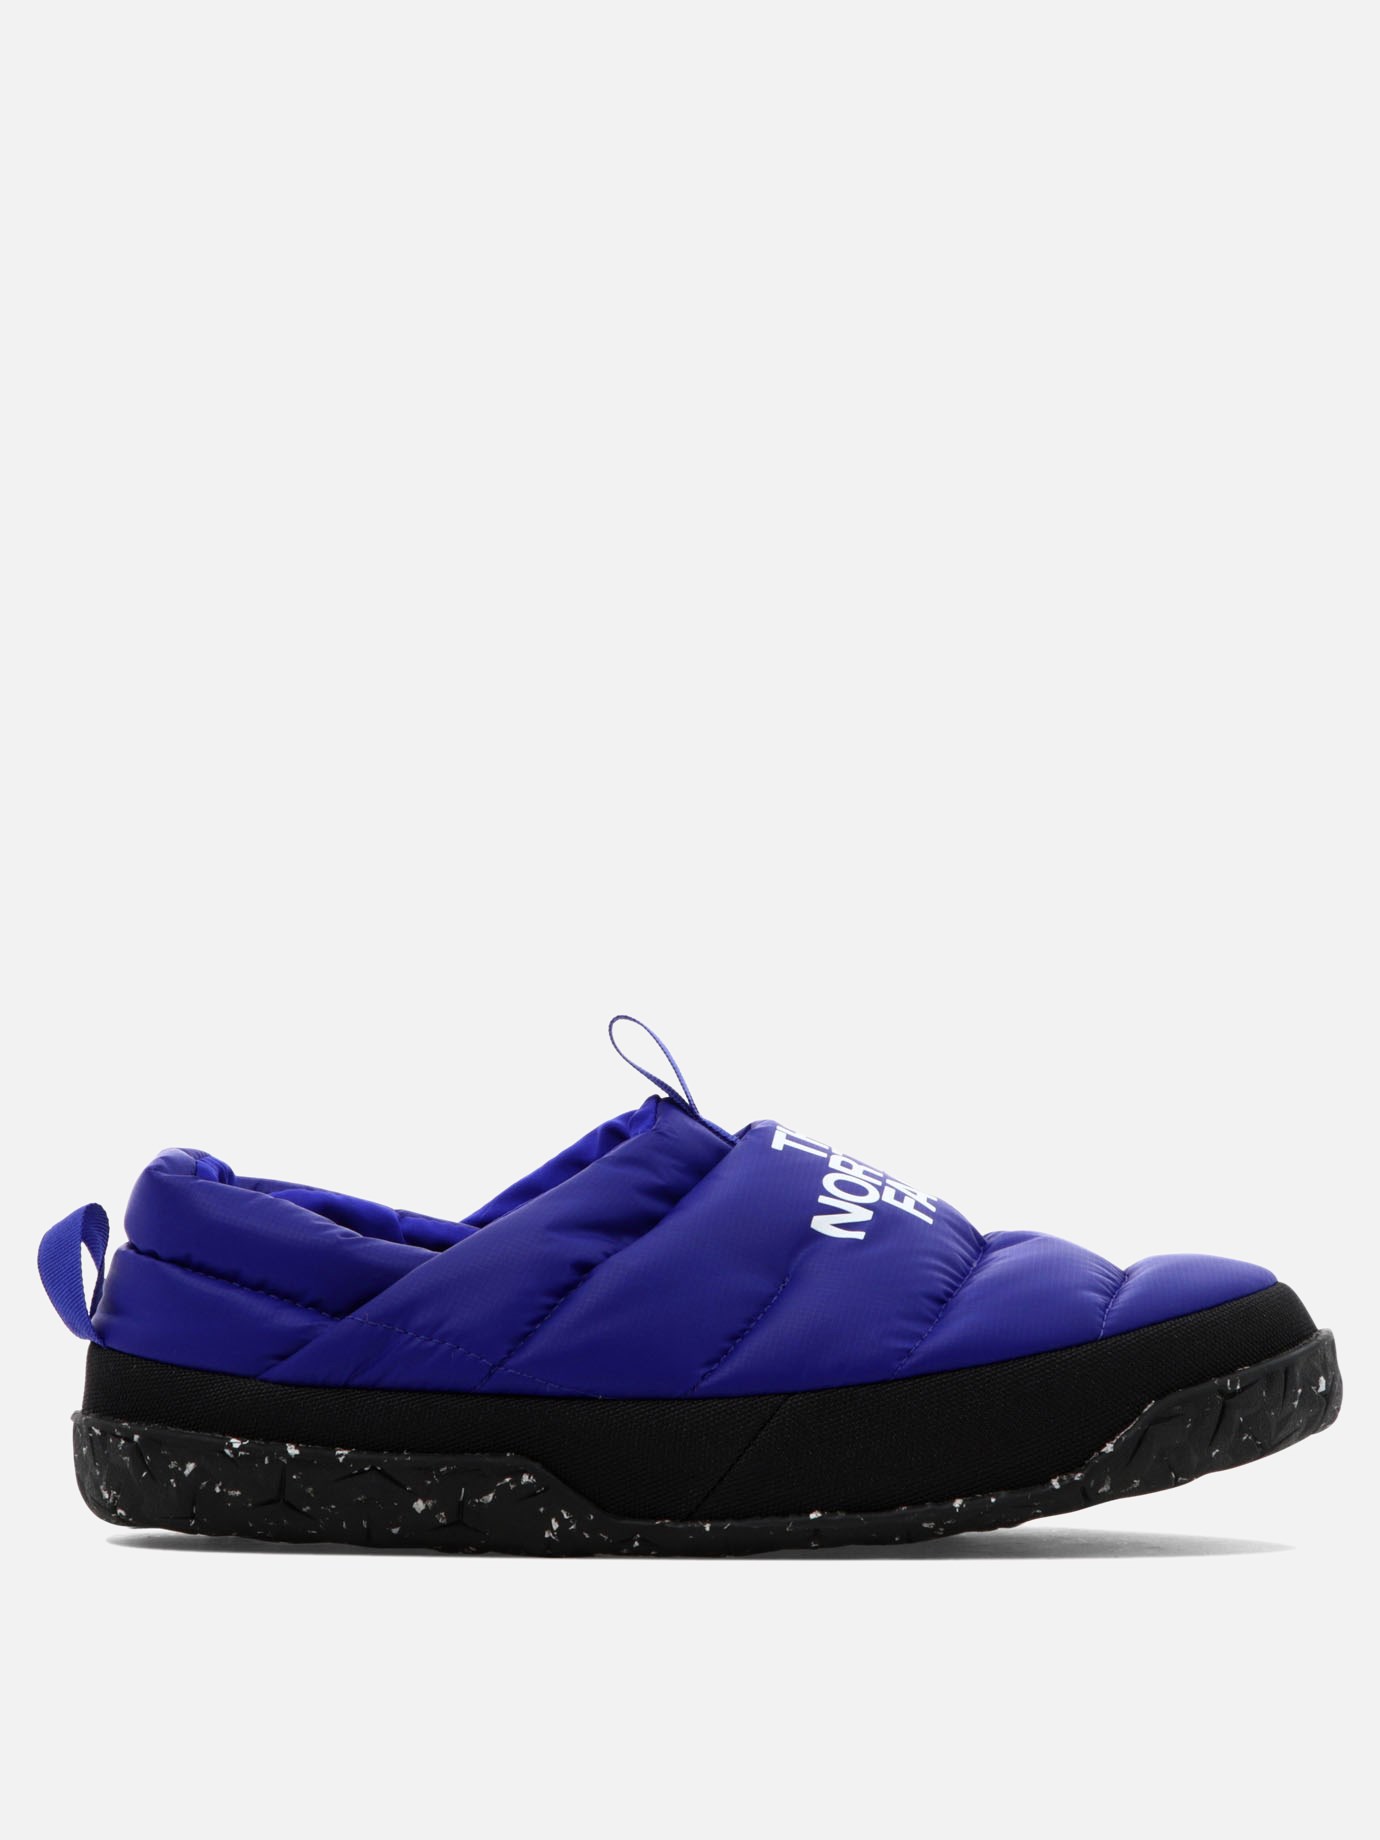 Pantofole  Nuptse  by The North Face